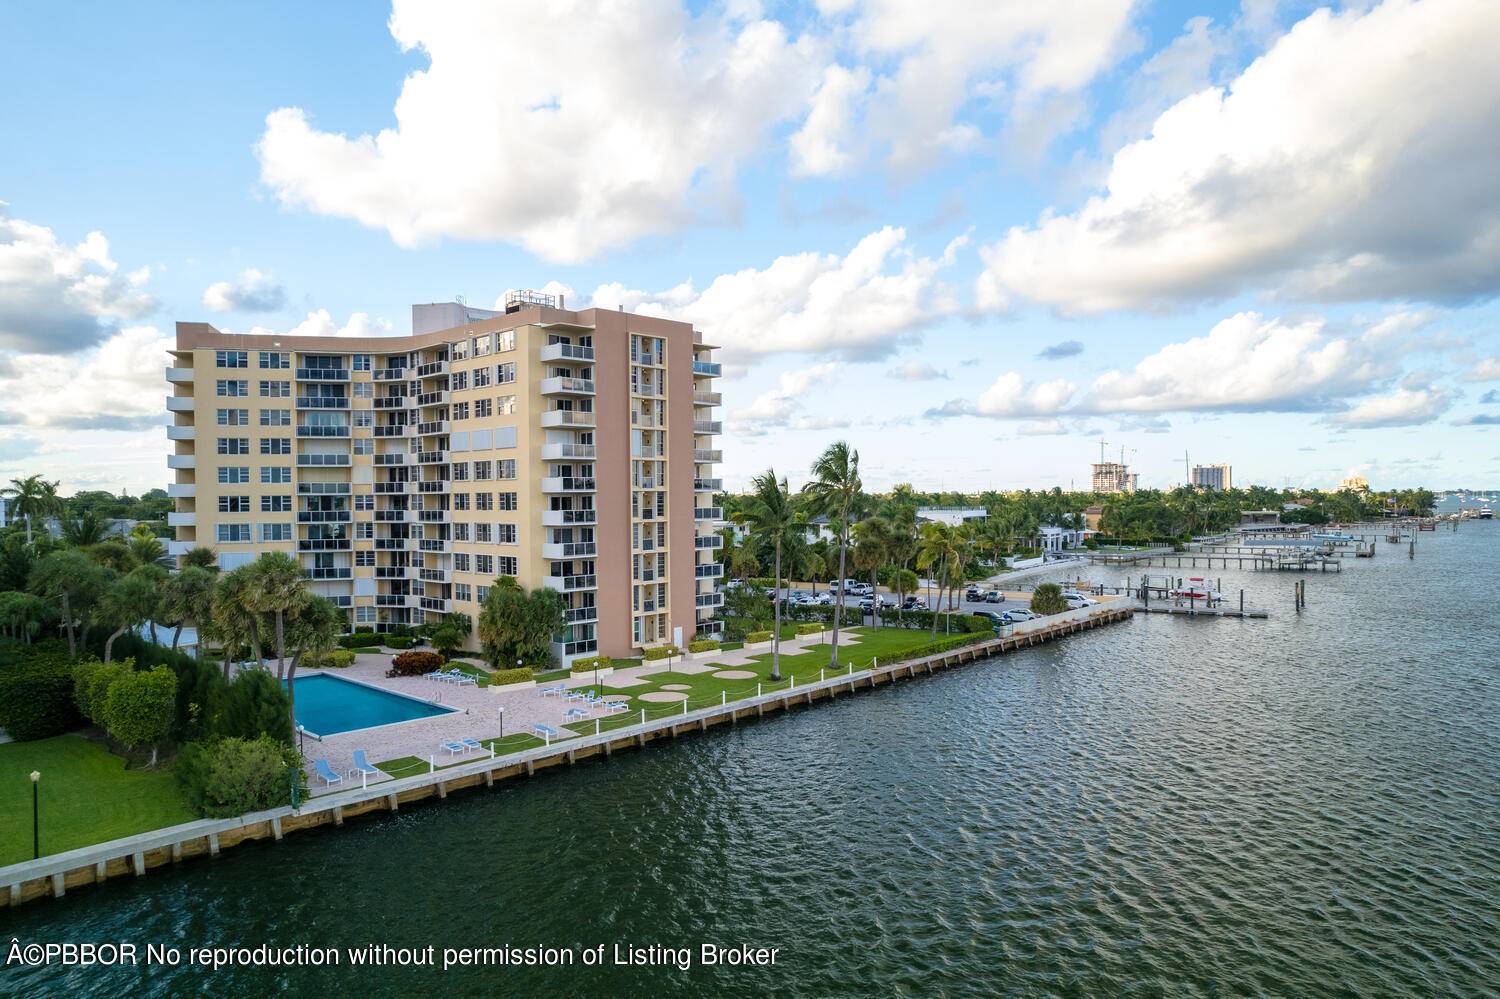 This gut renovated apartment sits directly on the intra coastal with spectacular direct views of Palm Beach and the waterway.